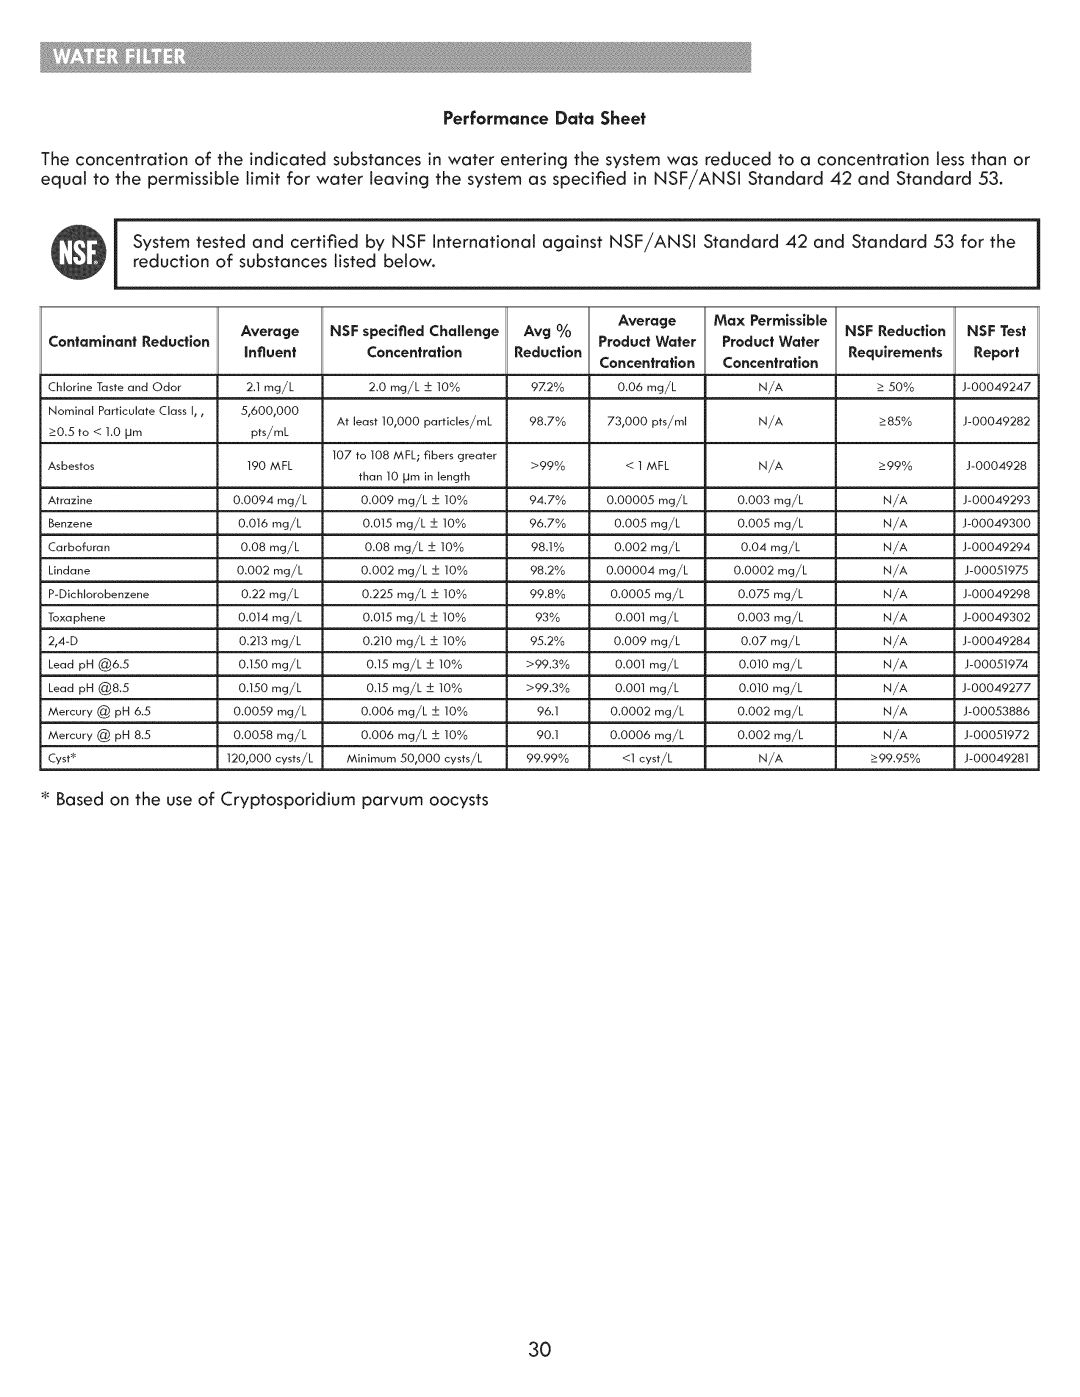 Kenmore 795.7205 manual Performance Data Sheet, Report, 9Z2%, _>50%, 5,600,000, 73,000, 50,000 cysts/L, 99.99% 